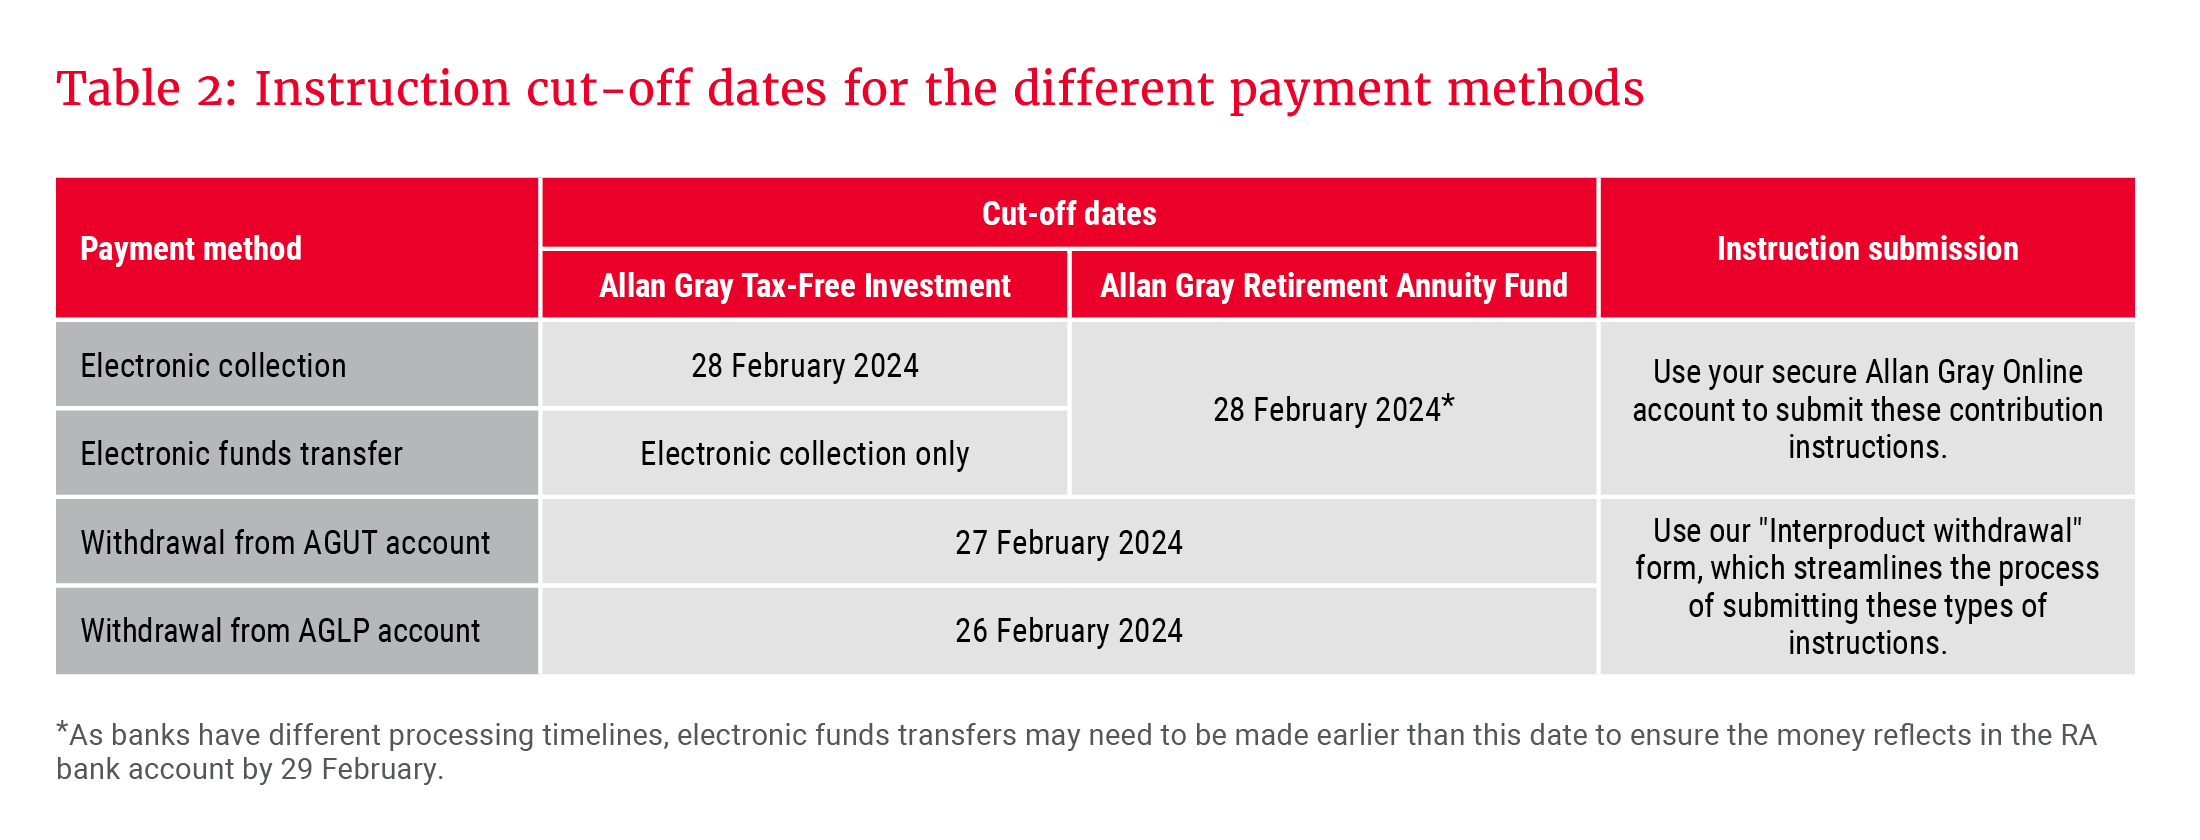 Table 2_Instruction cut-off dates for the different payment methods_300dpi.png